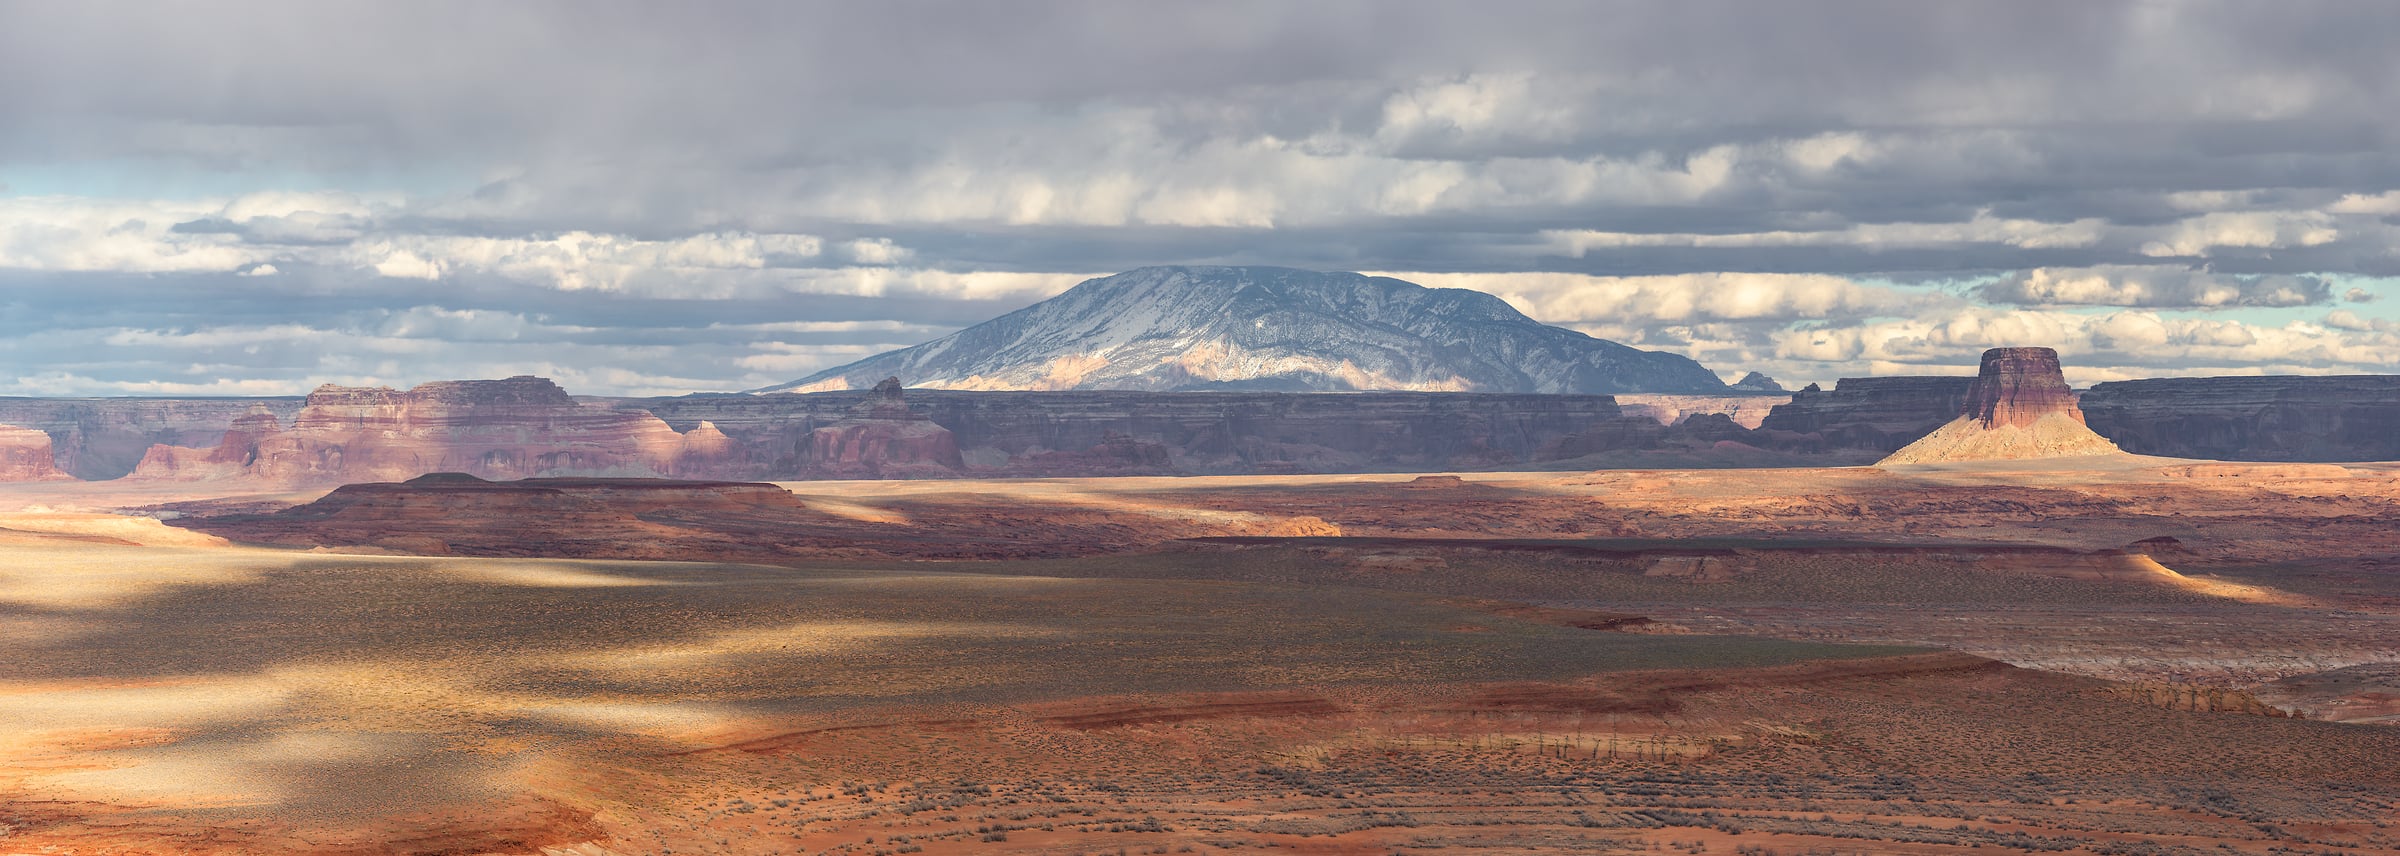 714 megapixels! A very high resolution, large-format panorama photo of Navajo Mountain and desert plains; American West landscape photograph created by Chris Blake at Navajo Mountain in Utah.